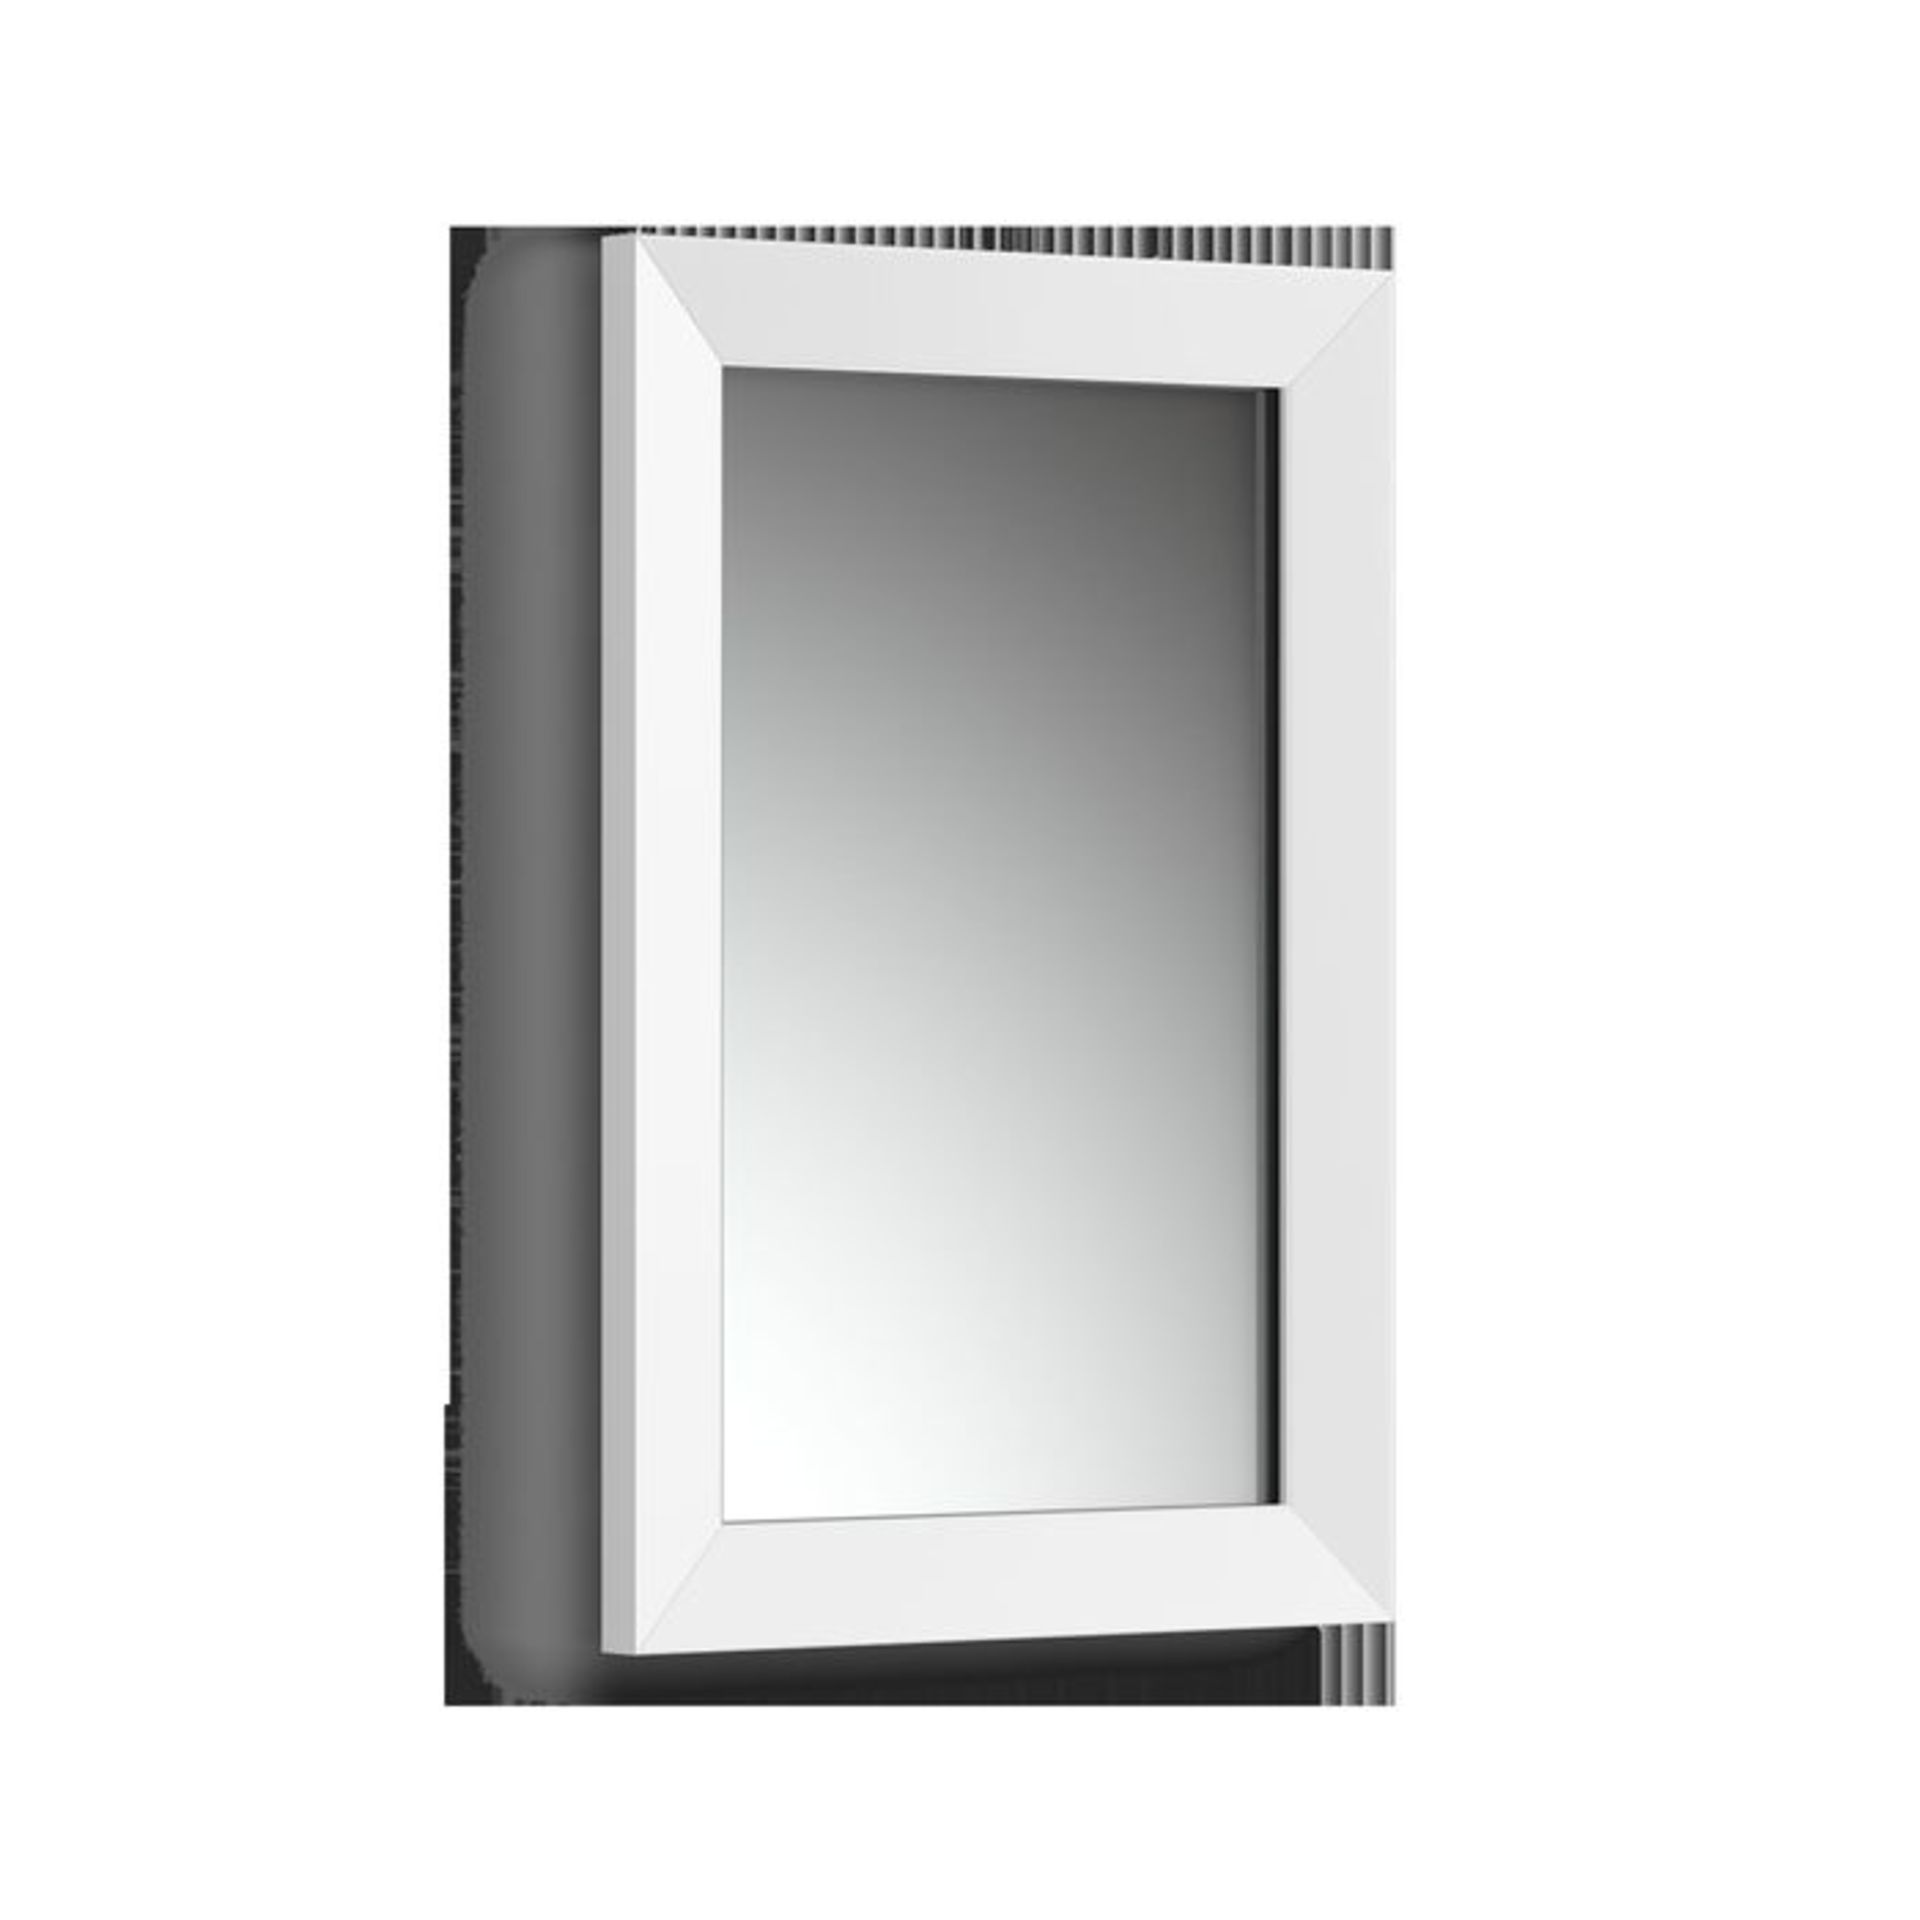 (DW48) 300x450mm Clover Gloss White Framed Mirror Made from eco friendly recycled plastics Wa... - Image 3 of 3